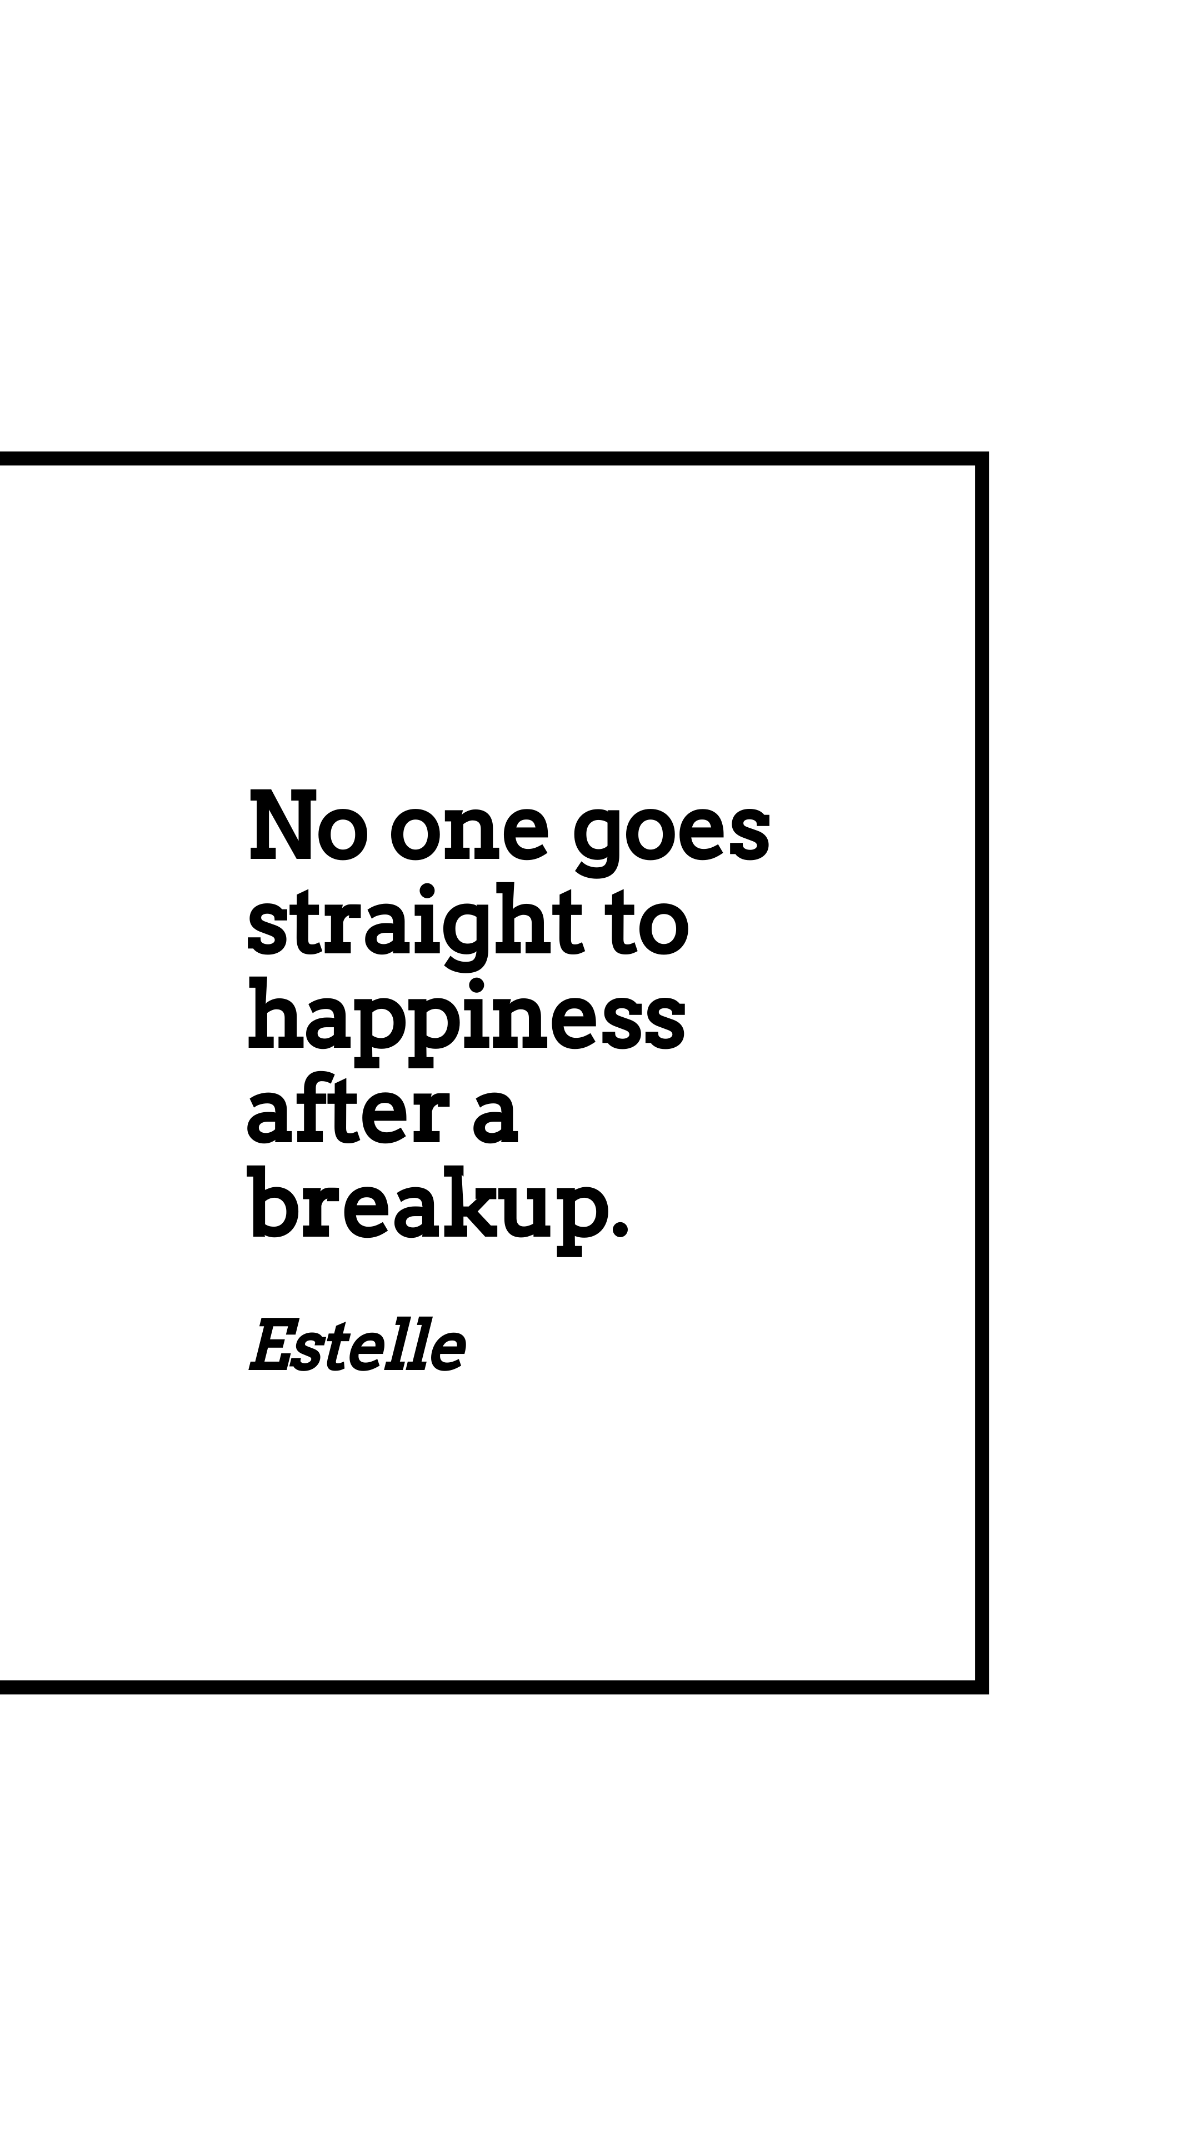 Free Estelle - No one goes straight to happiness after a breakup. Template